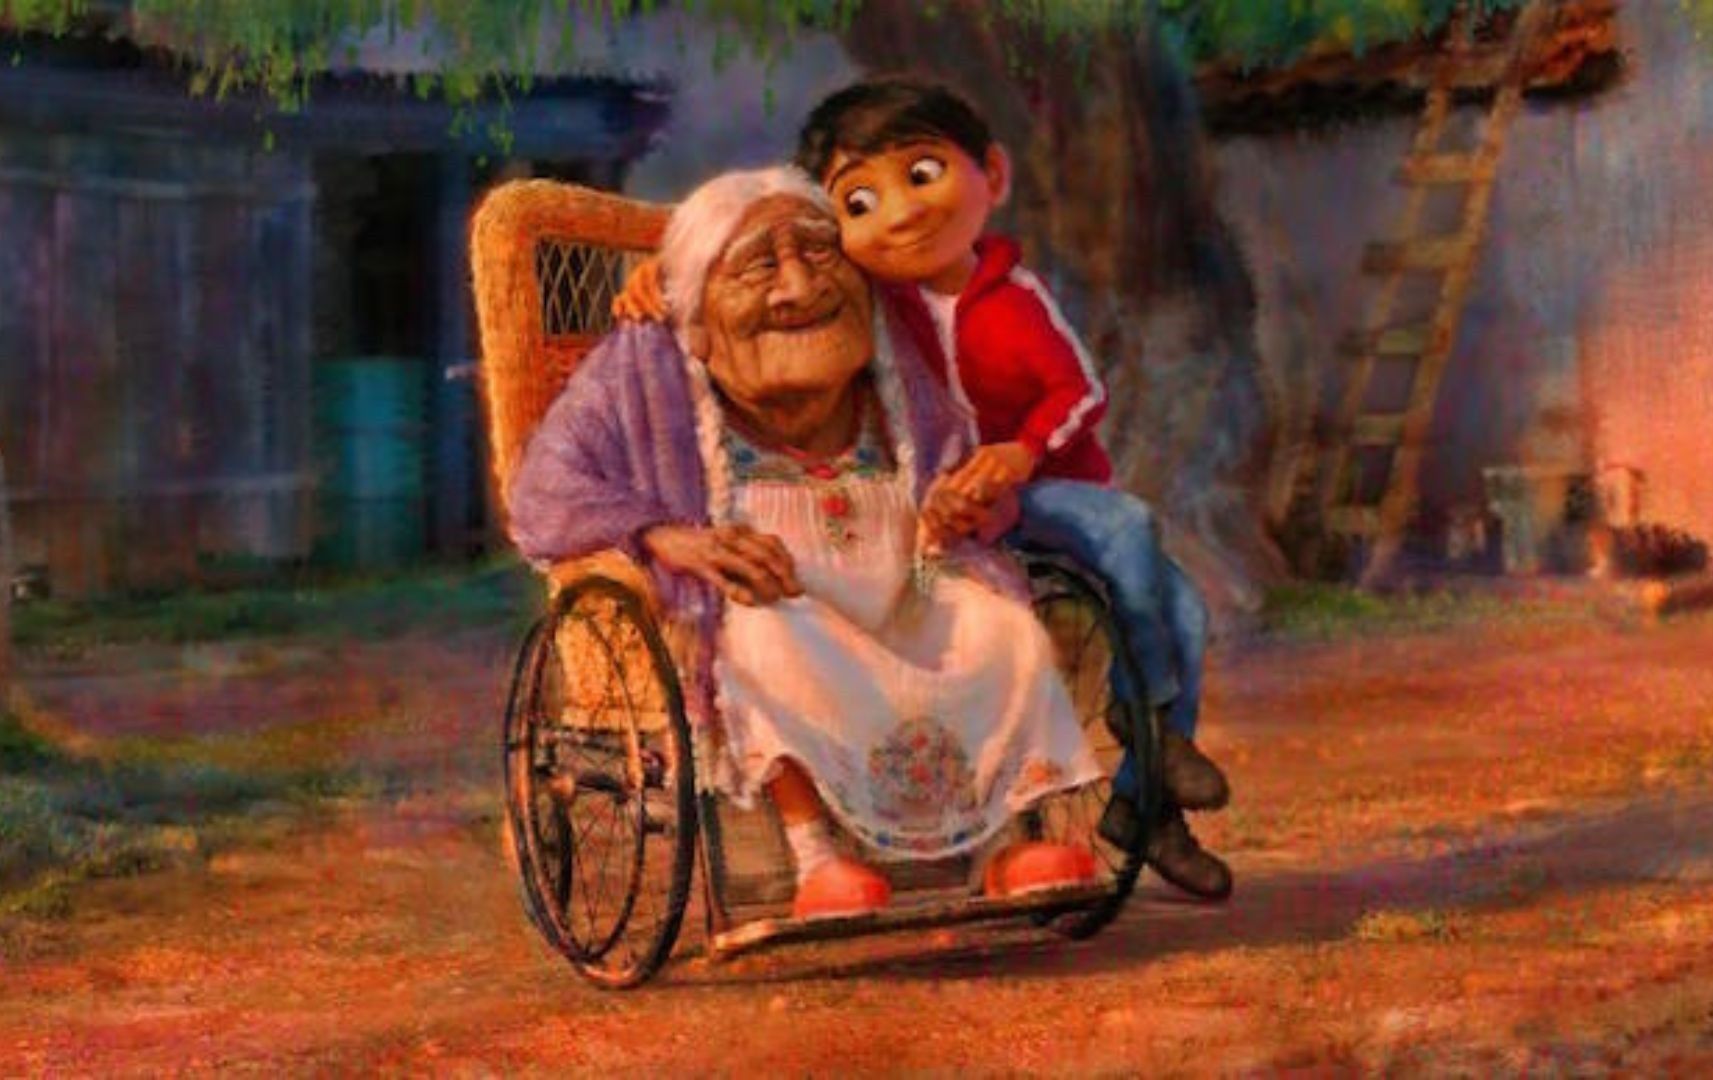 Inspiration for Pixar's 'Mama Coco' dead at 109